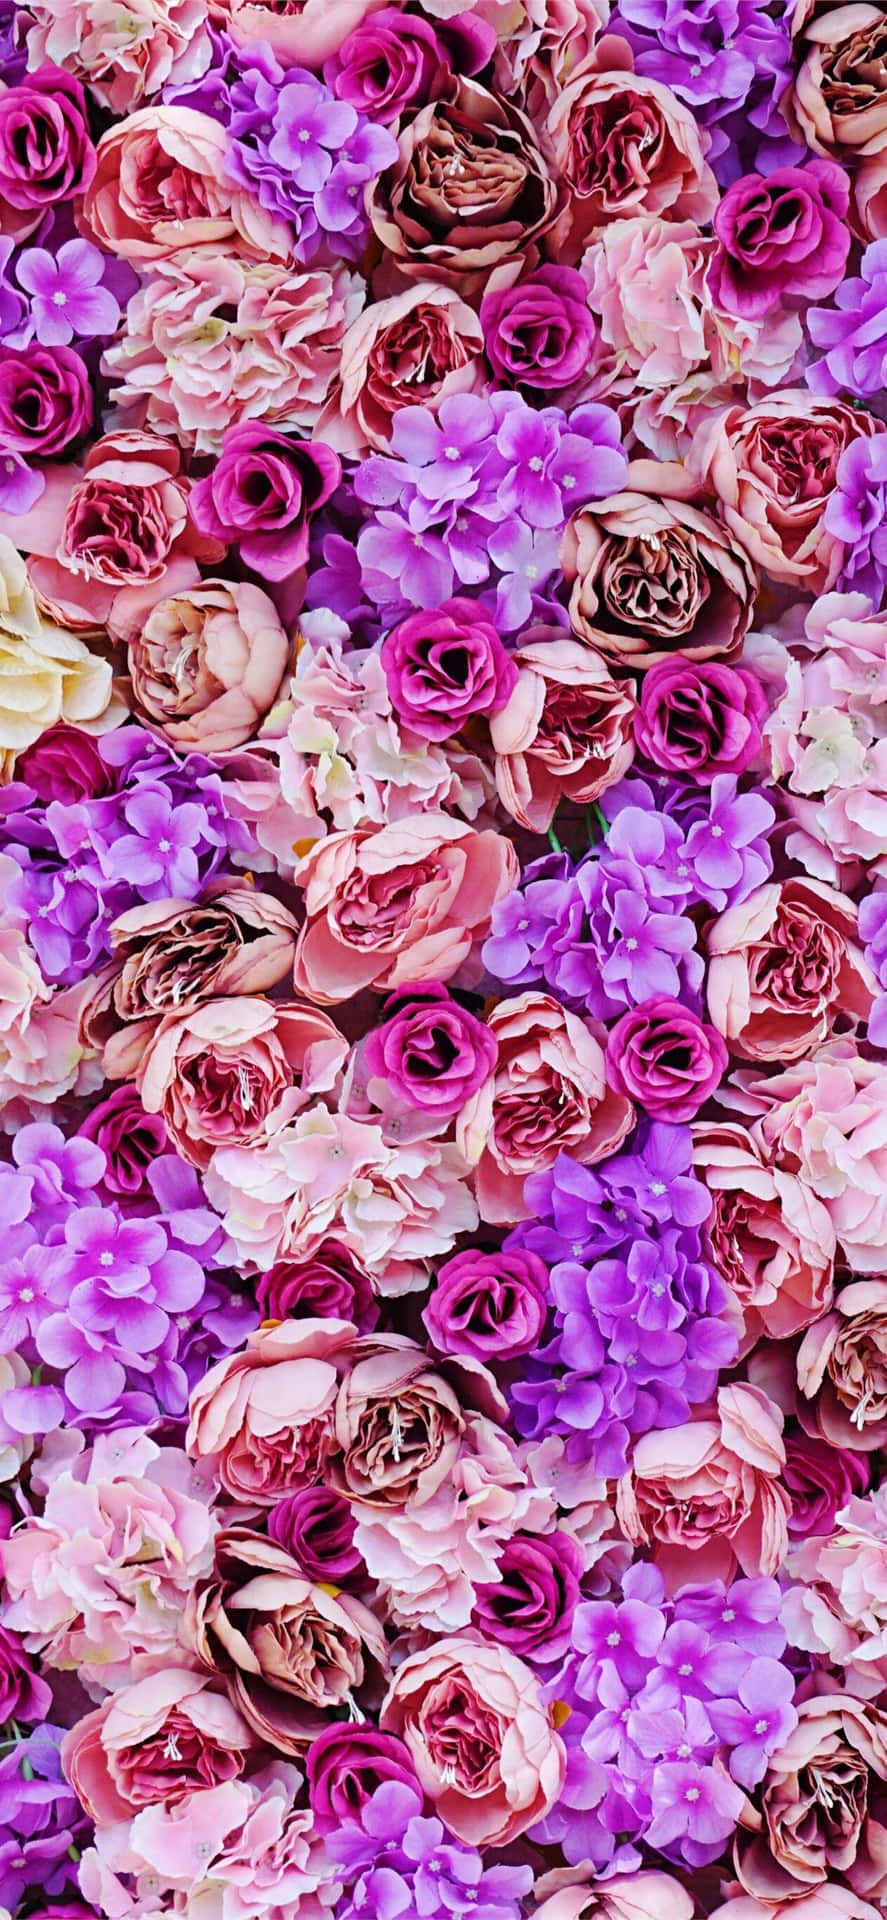 A Bunch Of Pink And Purple Flowers Wallpaper